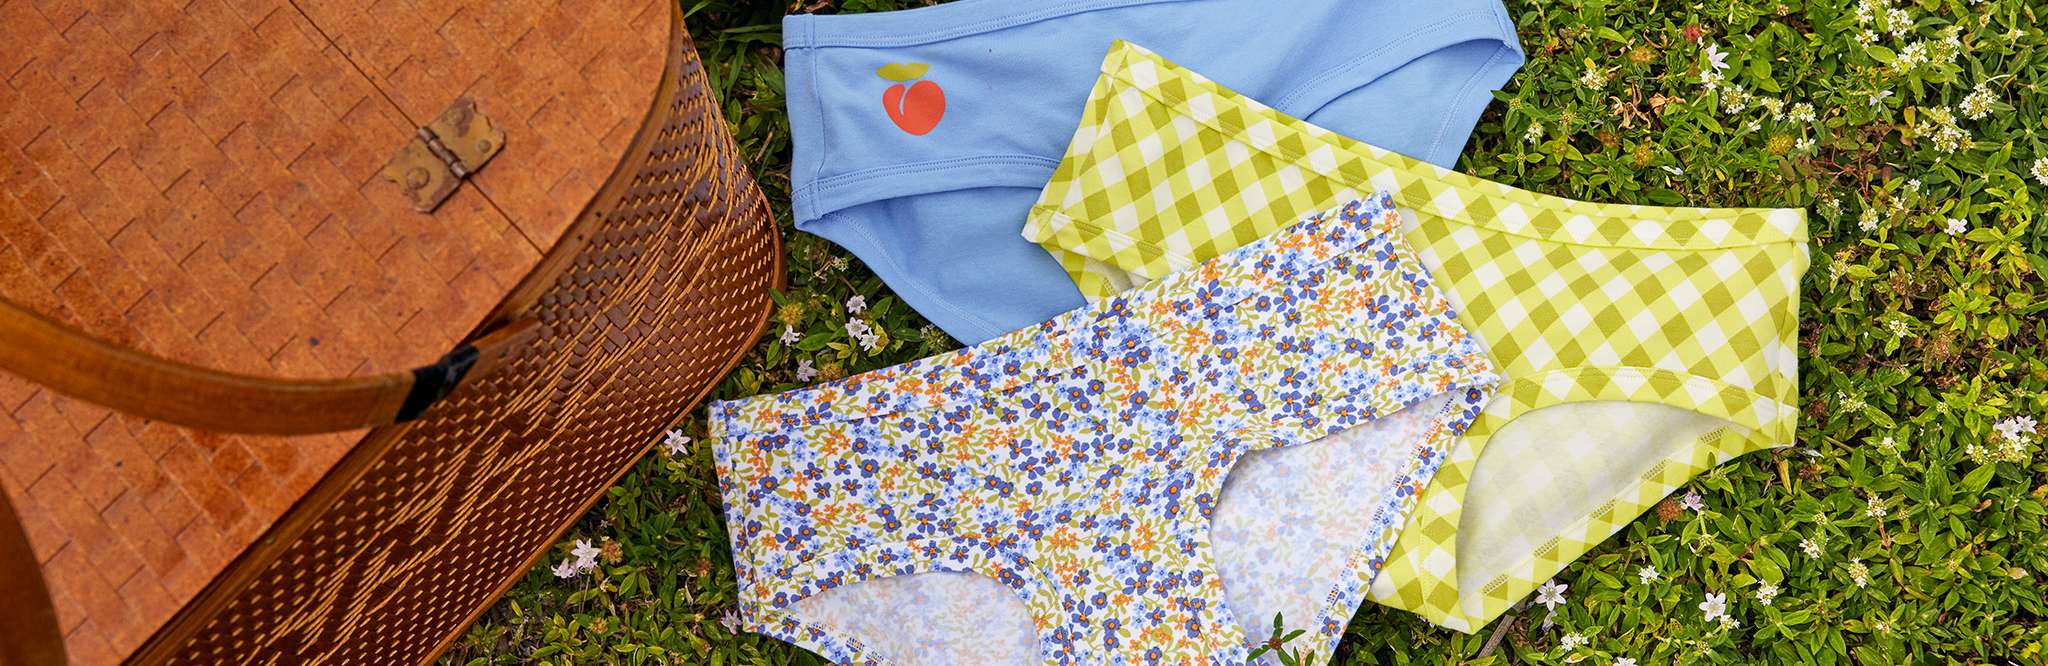 aerie multipack undies displayed on grass next to picnic basket